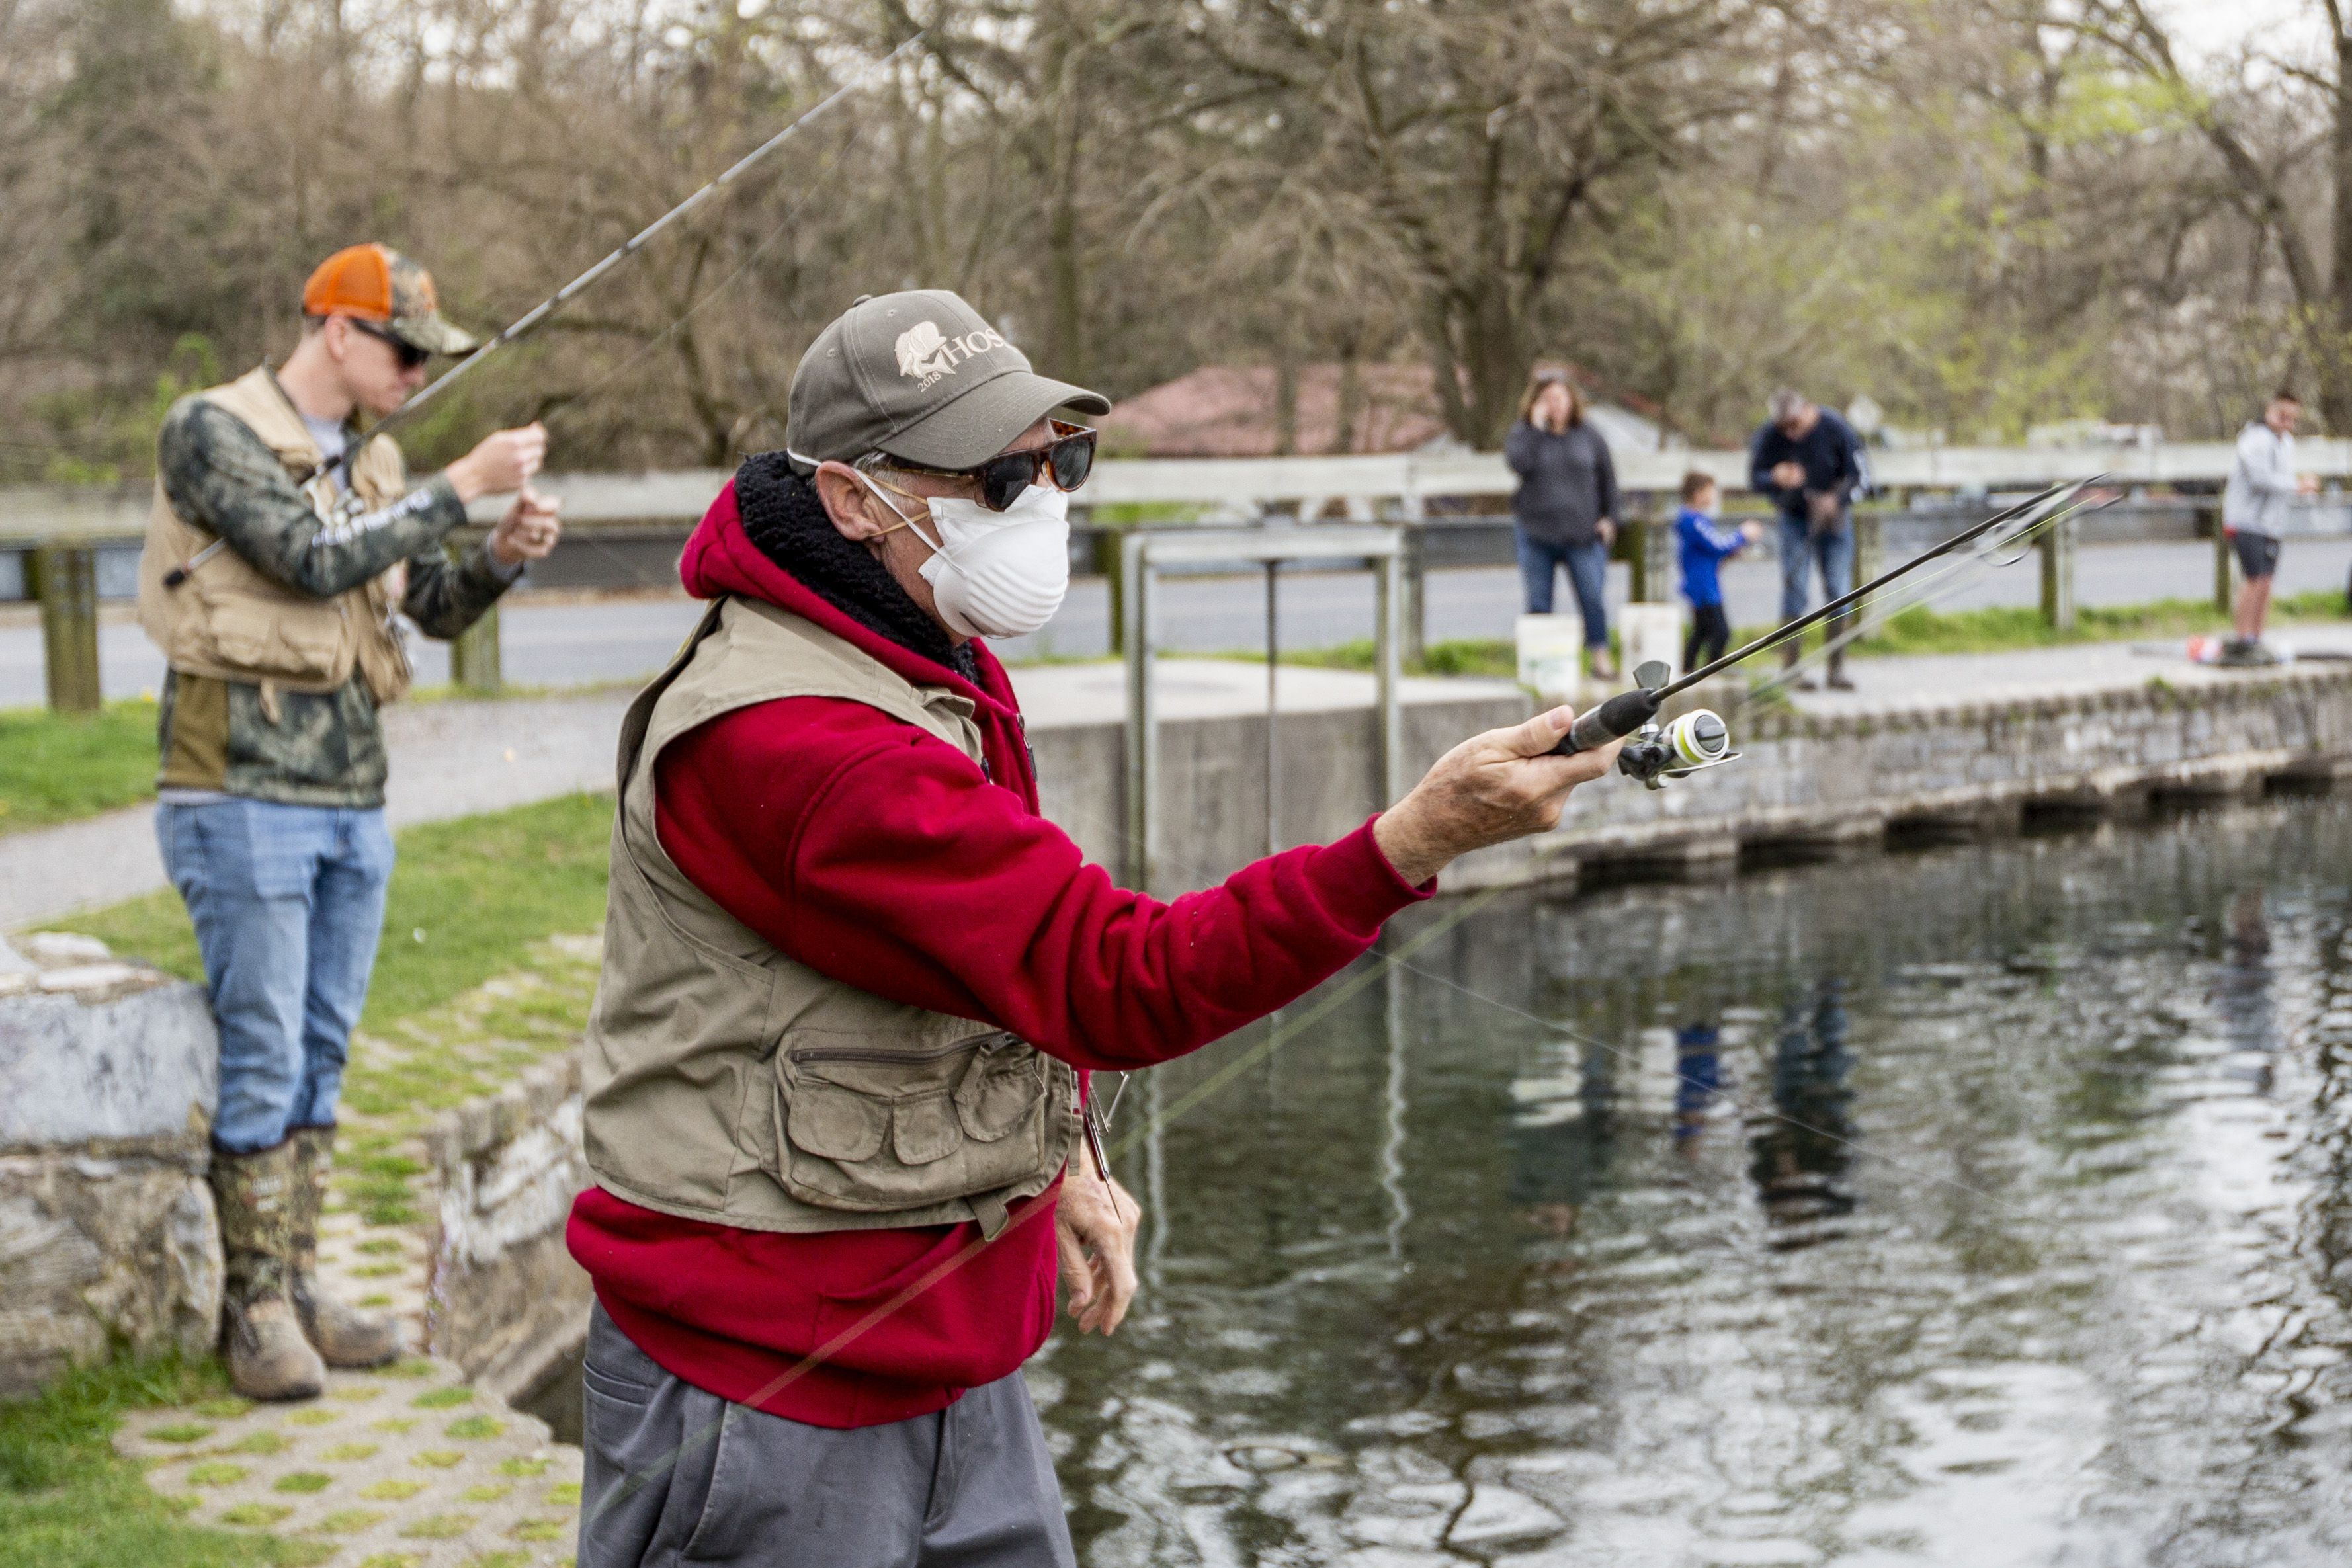 Trout fishing season in Pa. opens today, 2 weeks early, in an